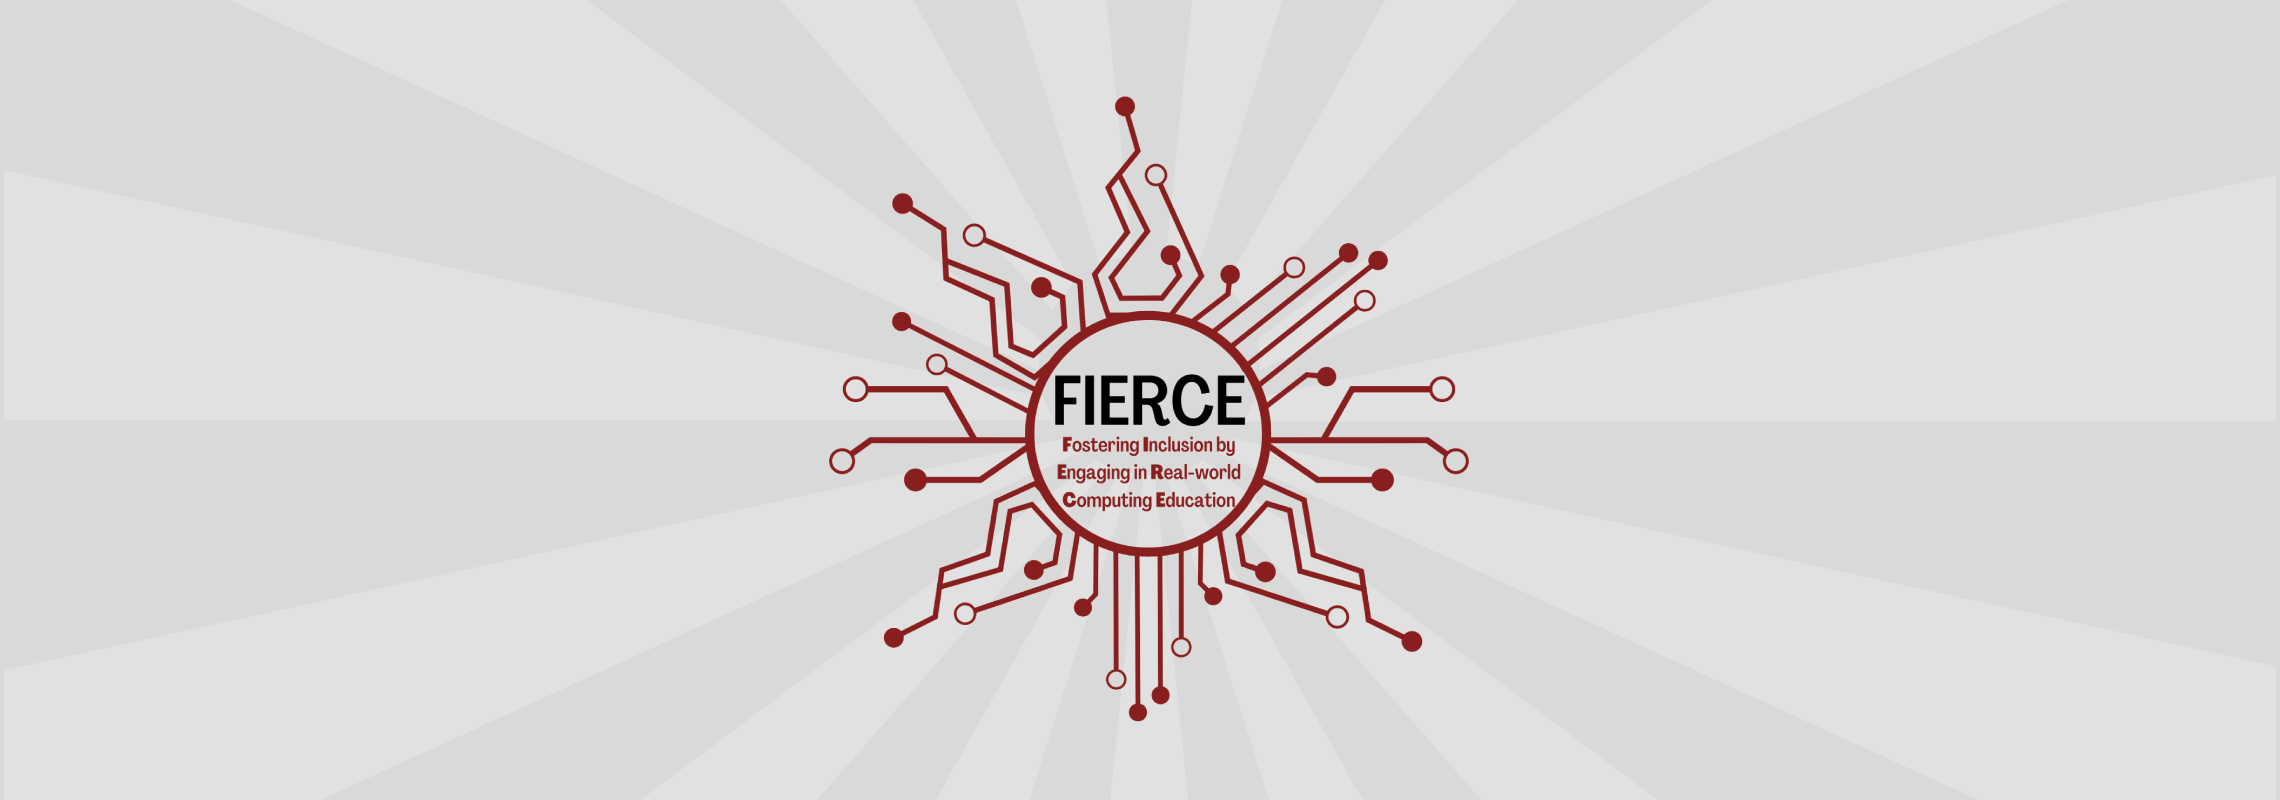 Fostering Inclusion by Engaging in Real-World Computing Education [FIERCE] RAP